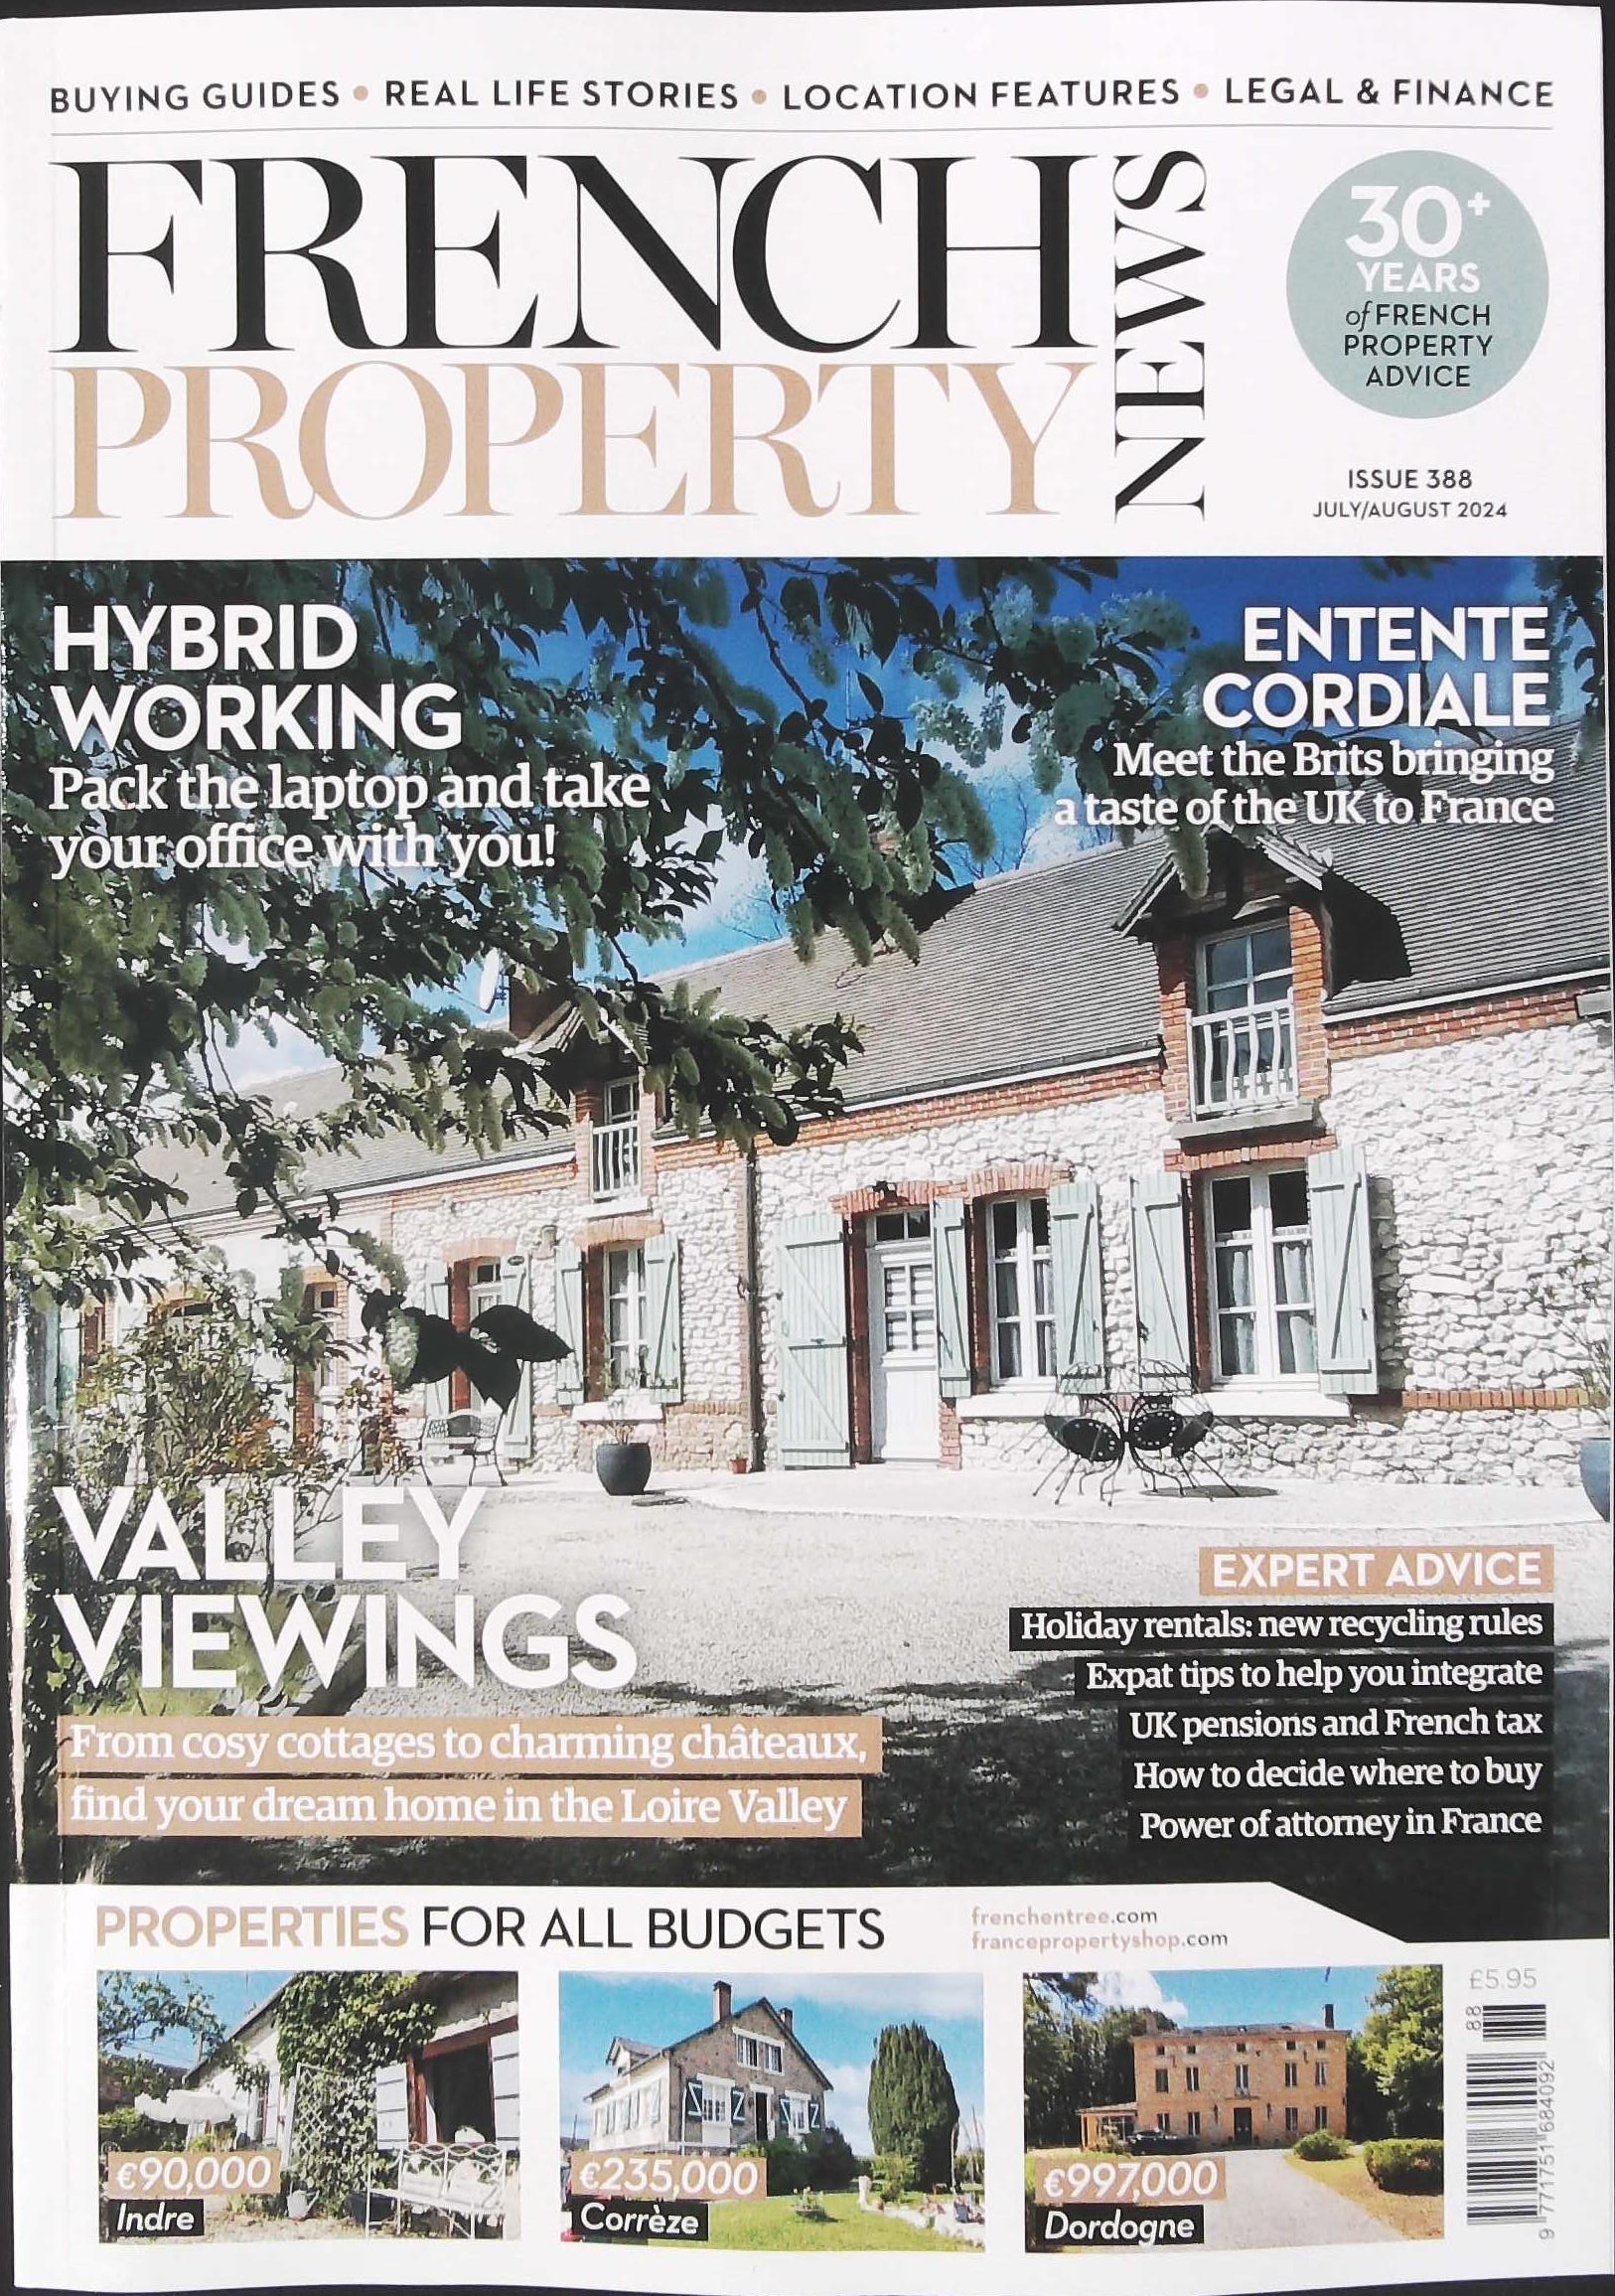 FRENCH PROPERTY NEWS